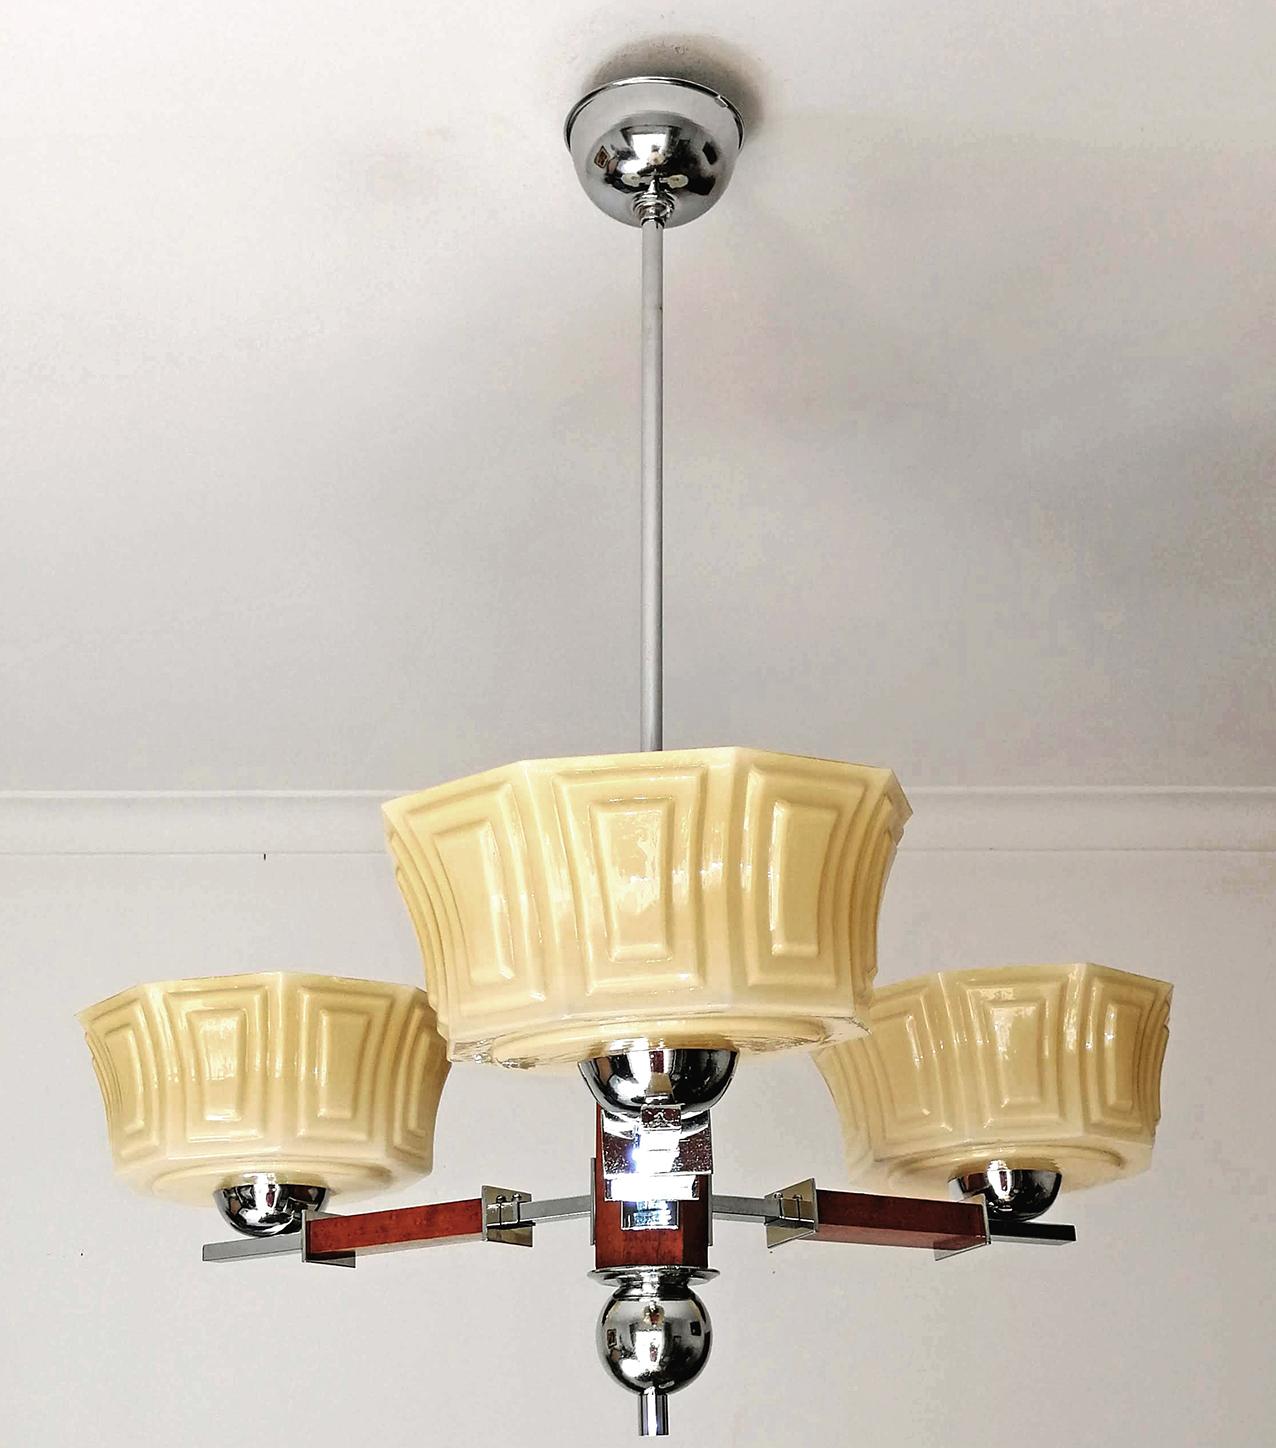 Bauhaus French Art Deco Opaline Amber Glass Shades Chrome and Wood Chandelier In Good Condition For Sale In Coimbra, PT